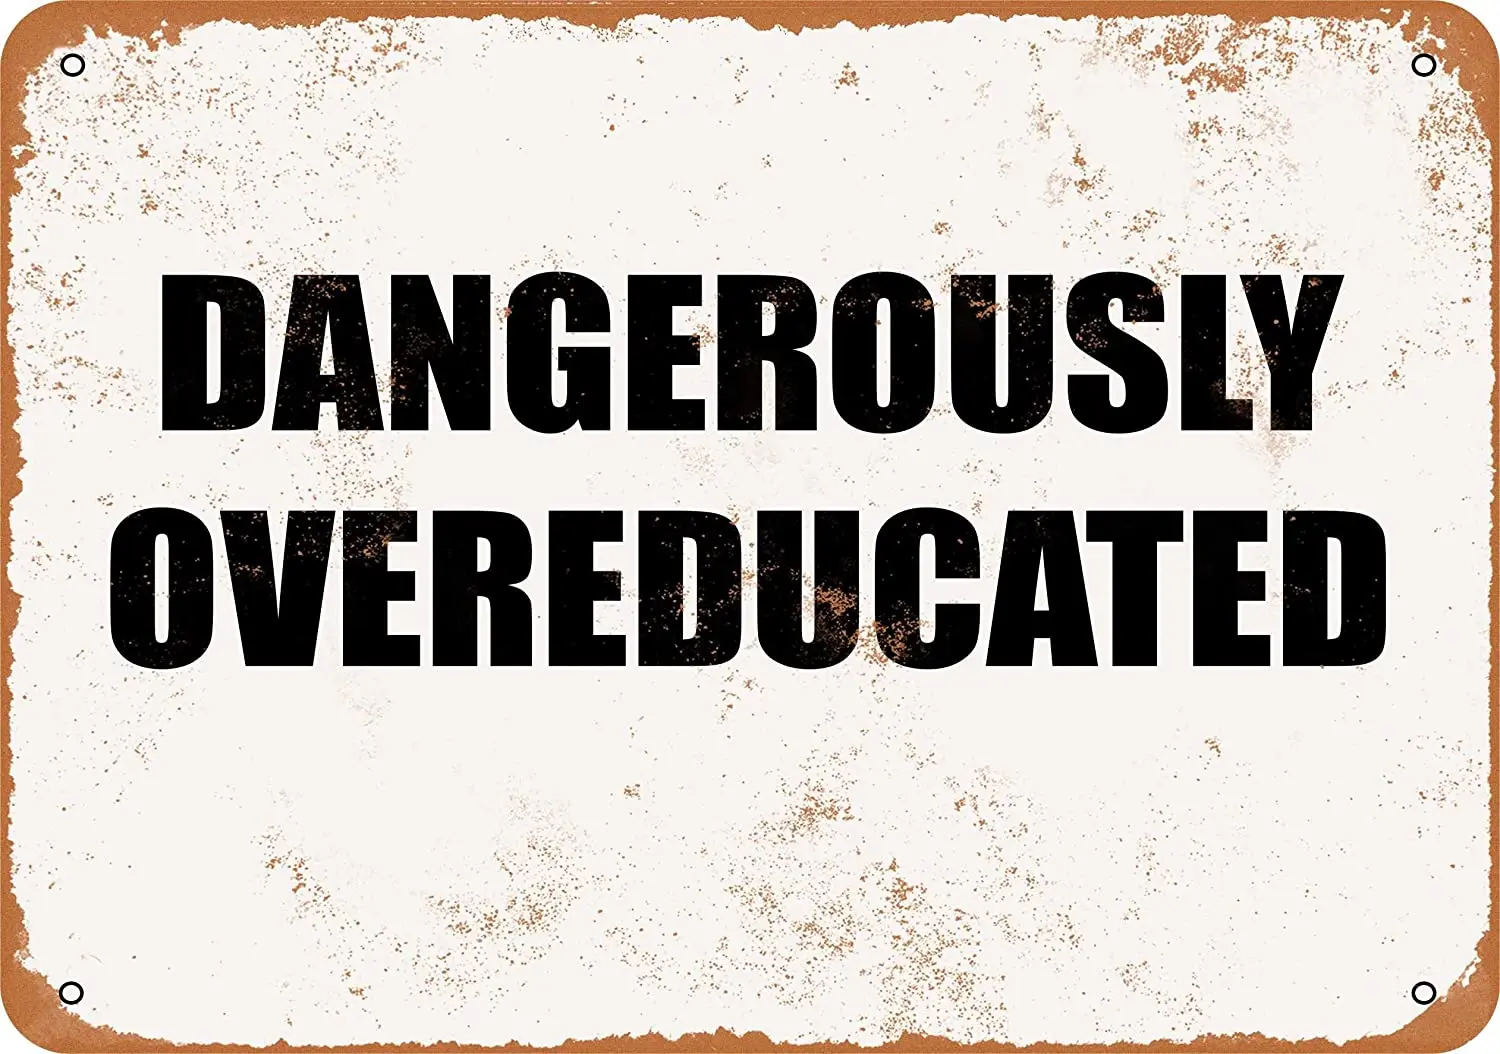 

WallColor 8*12 Metal Sign Dangerously Overeducated Vintage Look